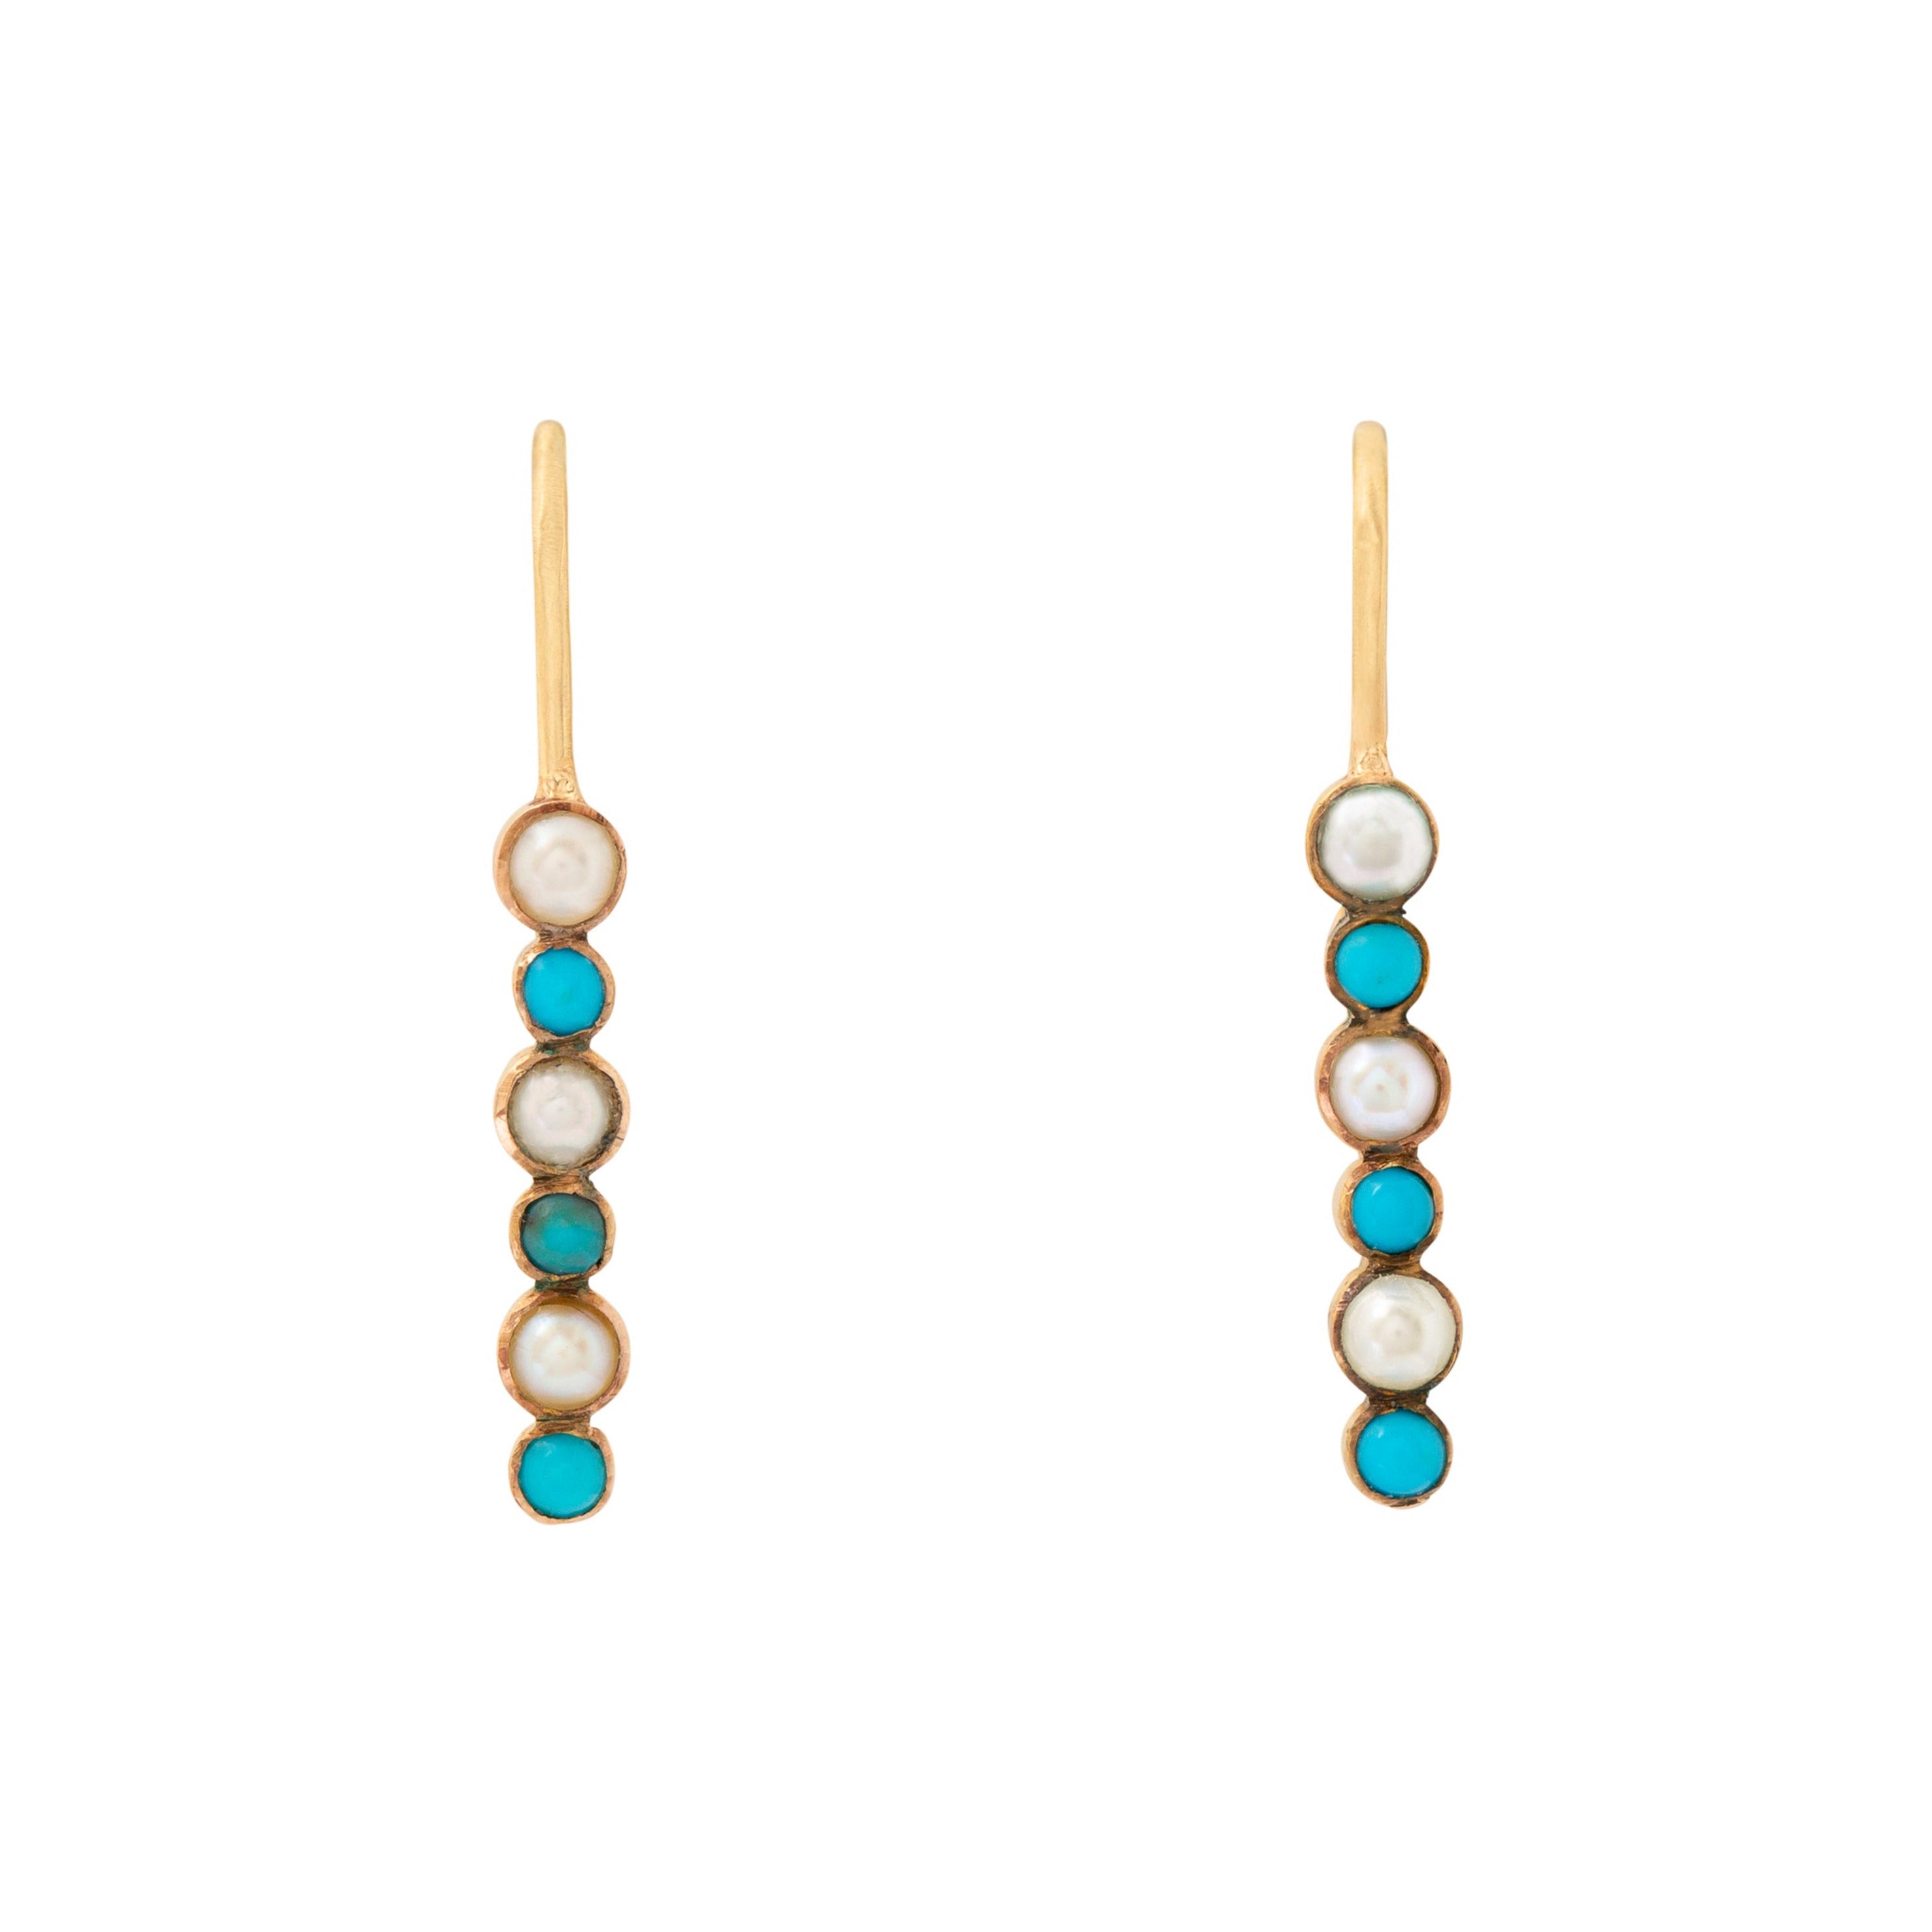 Victorian Turquoise, Pearl, and 9k Gold Drop Earrings